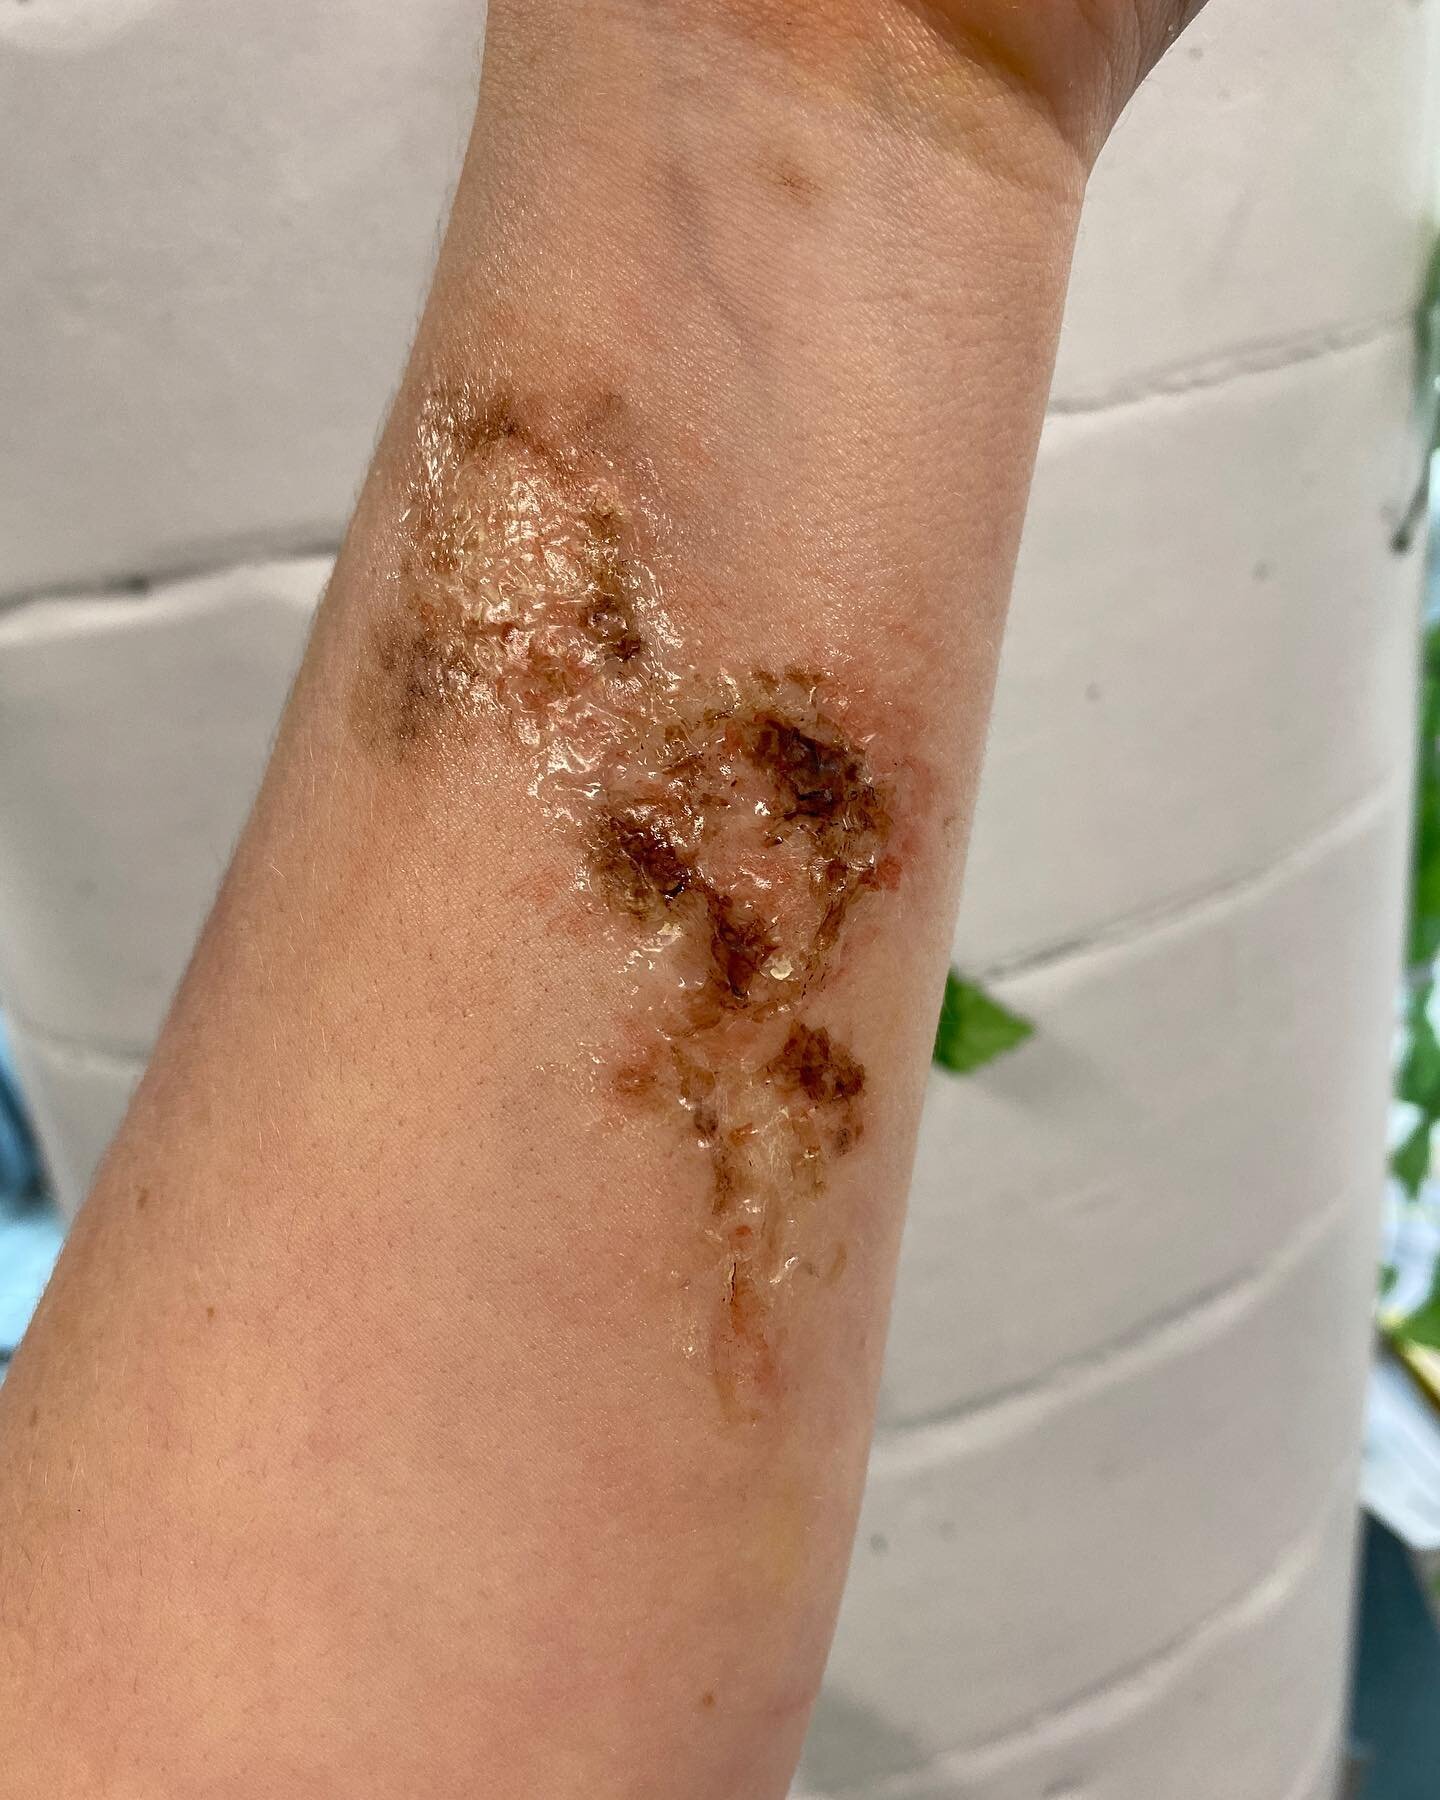 Nasty little chemical burn done with @alconefx 3rd degree silicone and alcohol paints. 
#sfxmakeup #burnmakeup #sfxmakeupartist #sfxmakeupmelbourne #woundsandinjuries #outofkitfx #chemicalburn #sfxmua